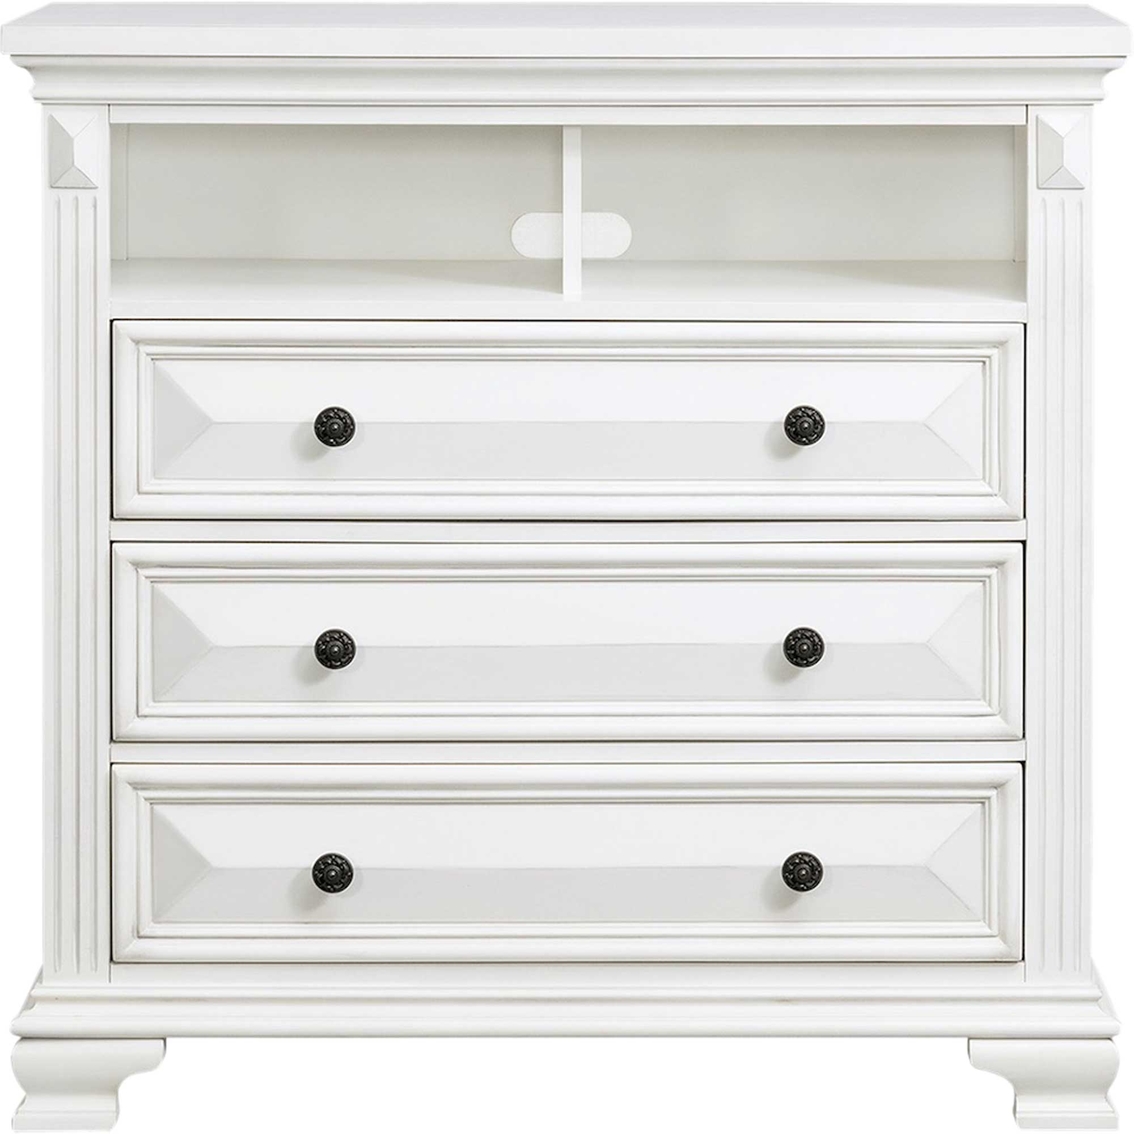 Elements Calloway White Media Chest - Image 2 of 2